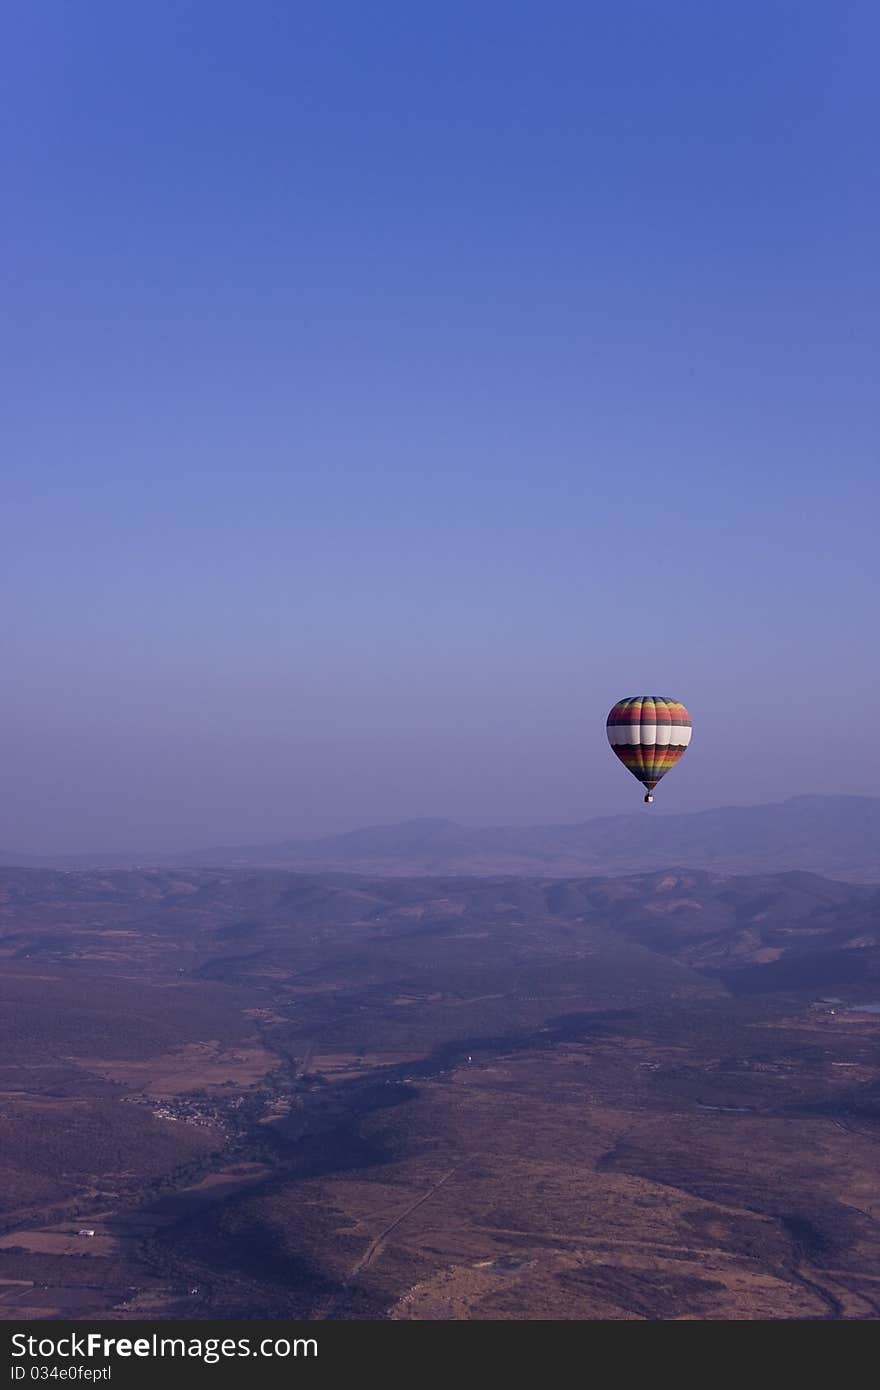 Verticle image of a single hot balloon flying in the mountains of central mexico. Verticle image of a single hot balloon flying in the mountains of central mexico